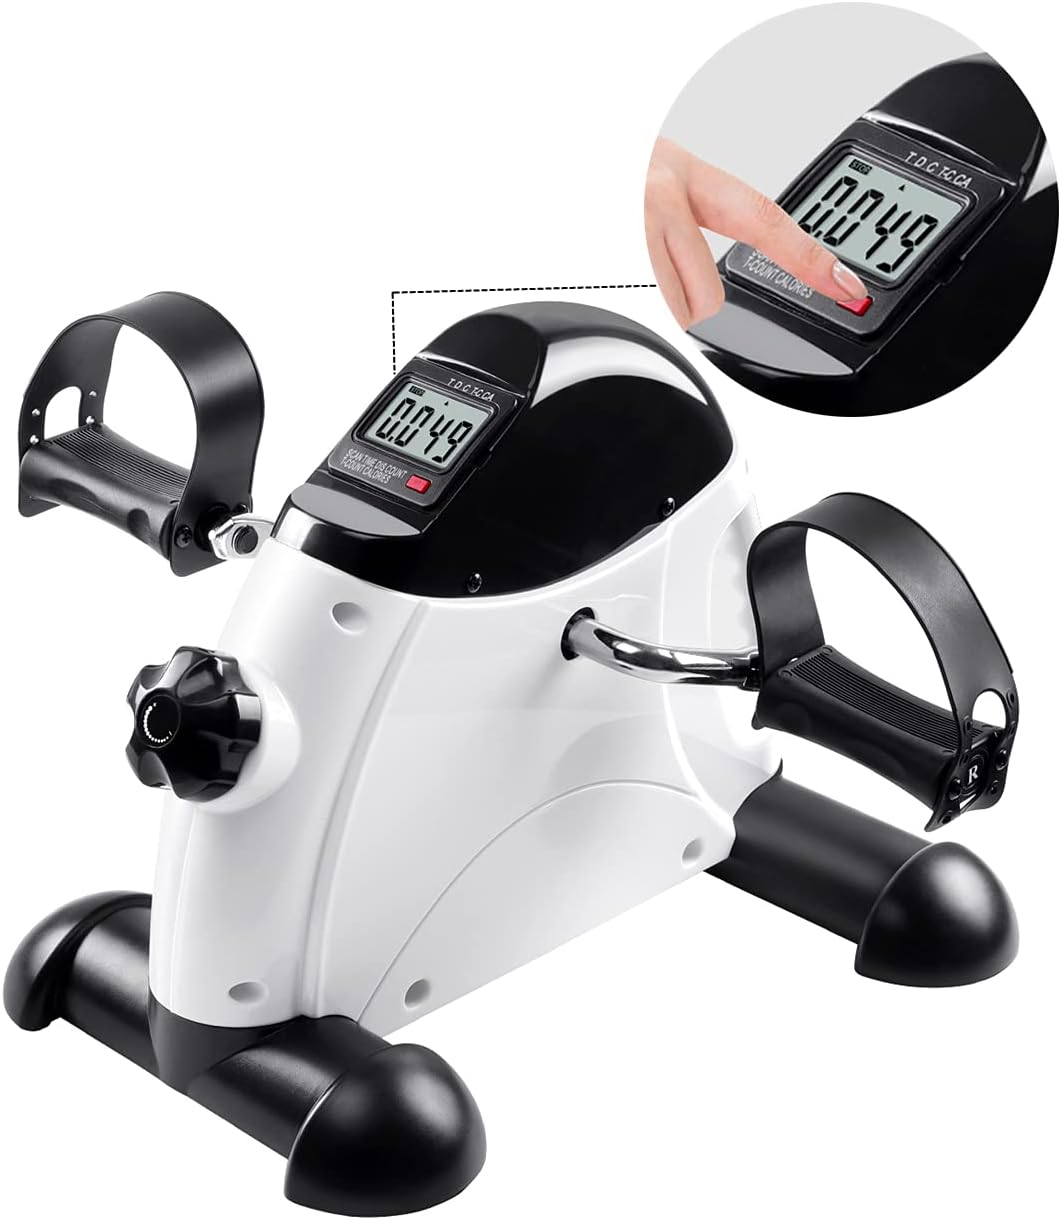 YOUSIS Pedal Exerciser Portable Mini Exercise Bike Home Leg Arm Exercise Equipment with LCD Display Adjustable Resistance for Fitness Cardio Training